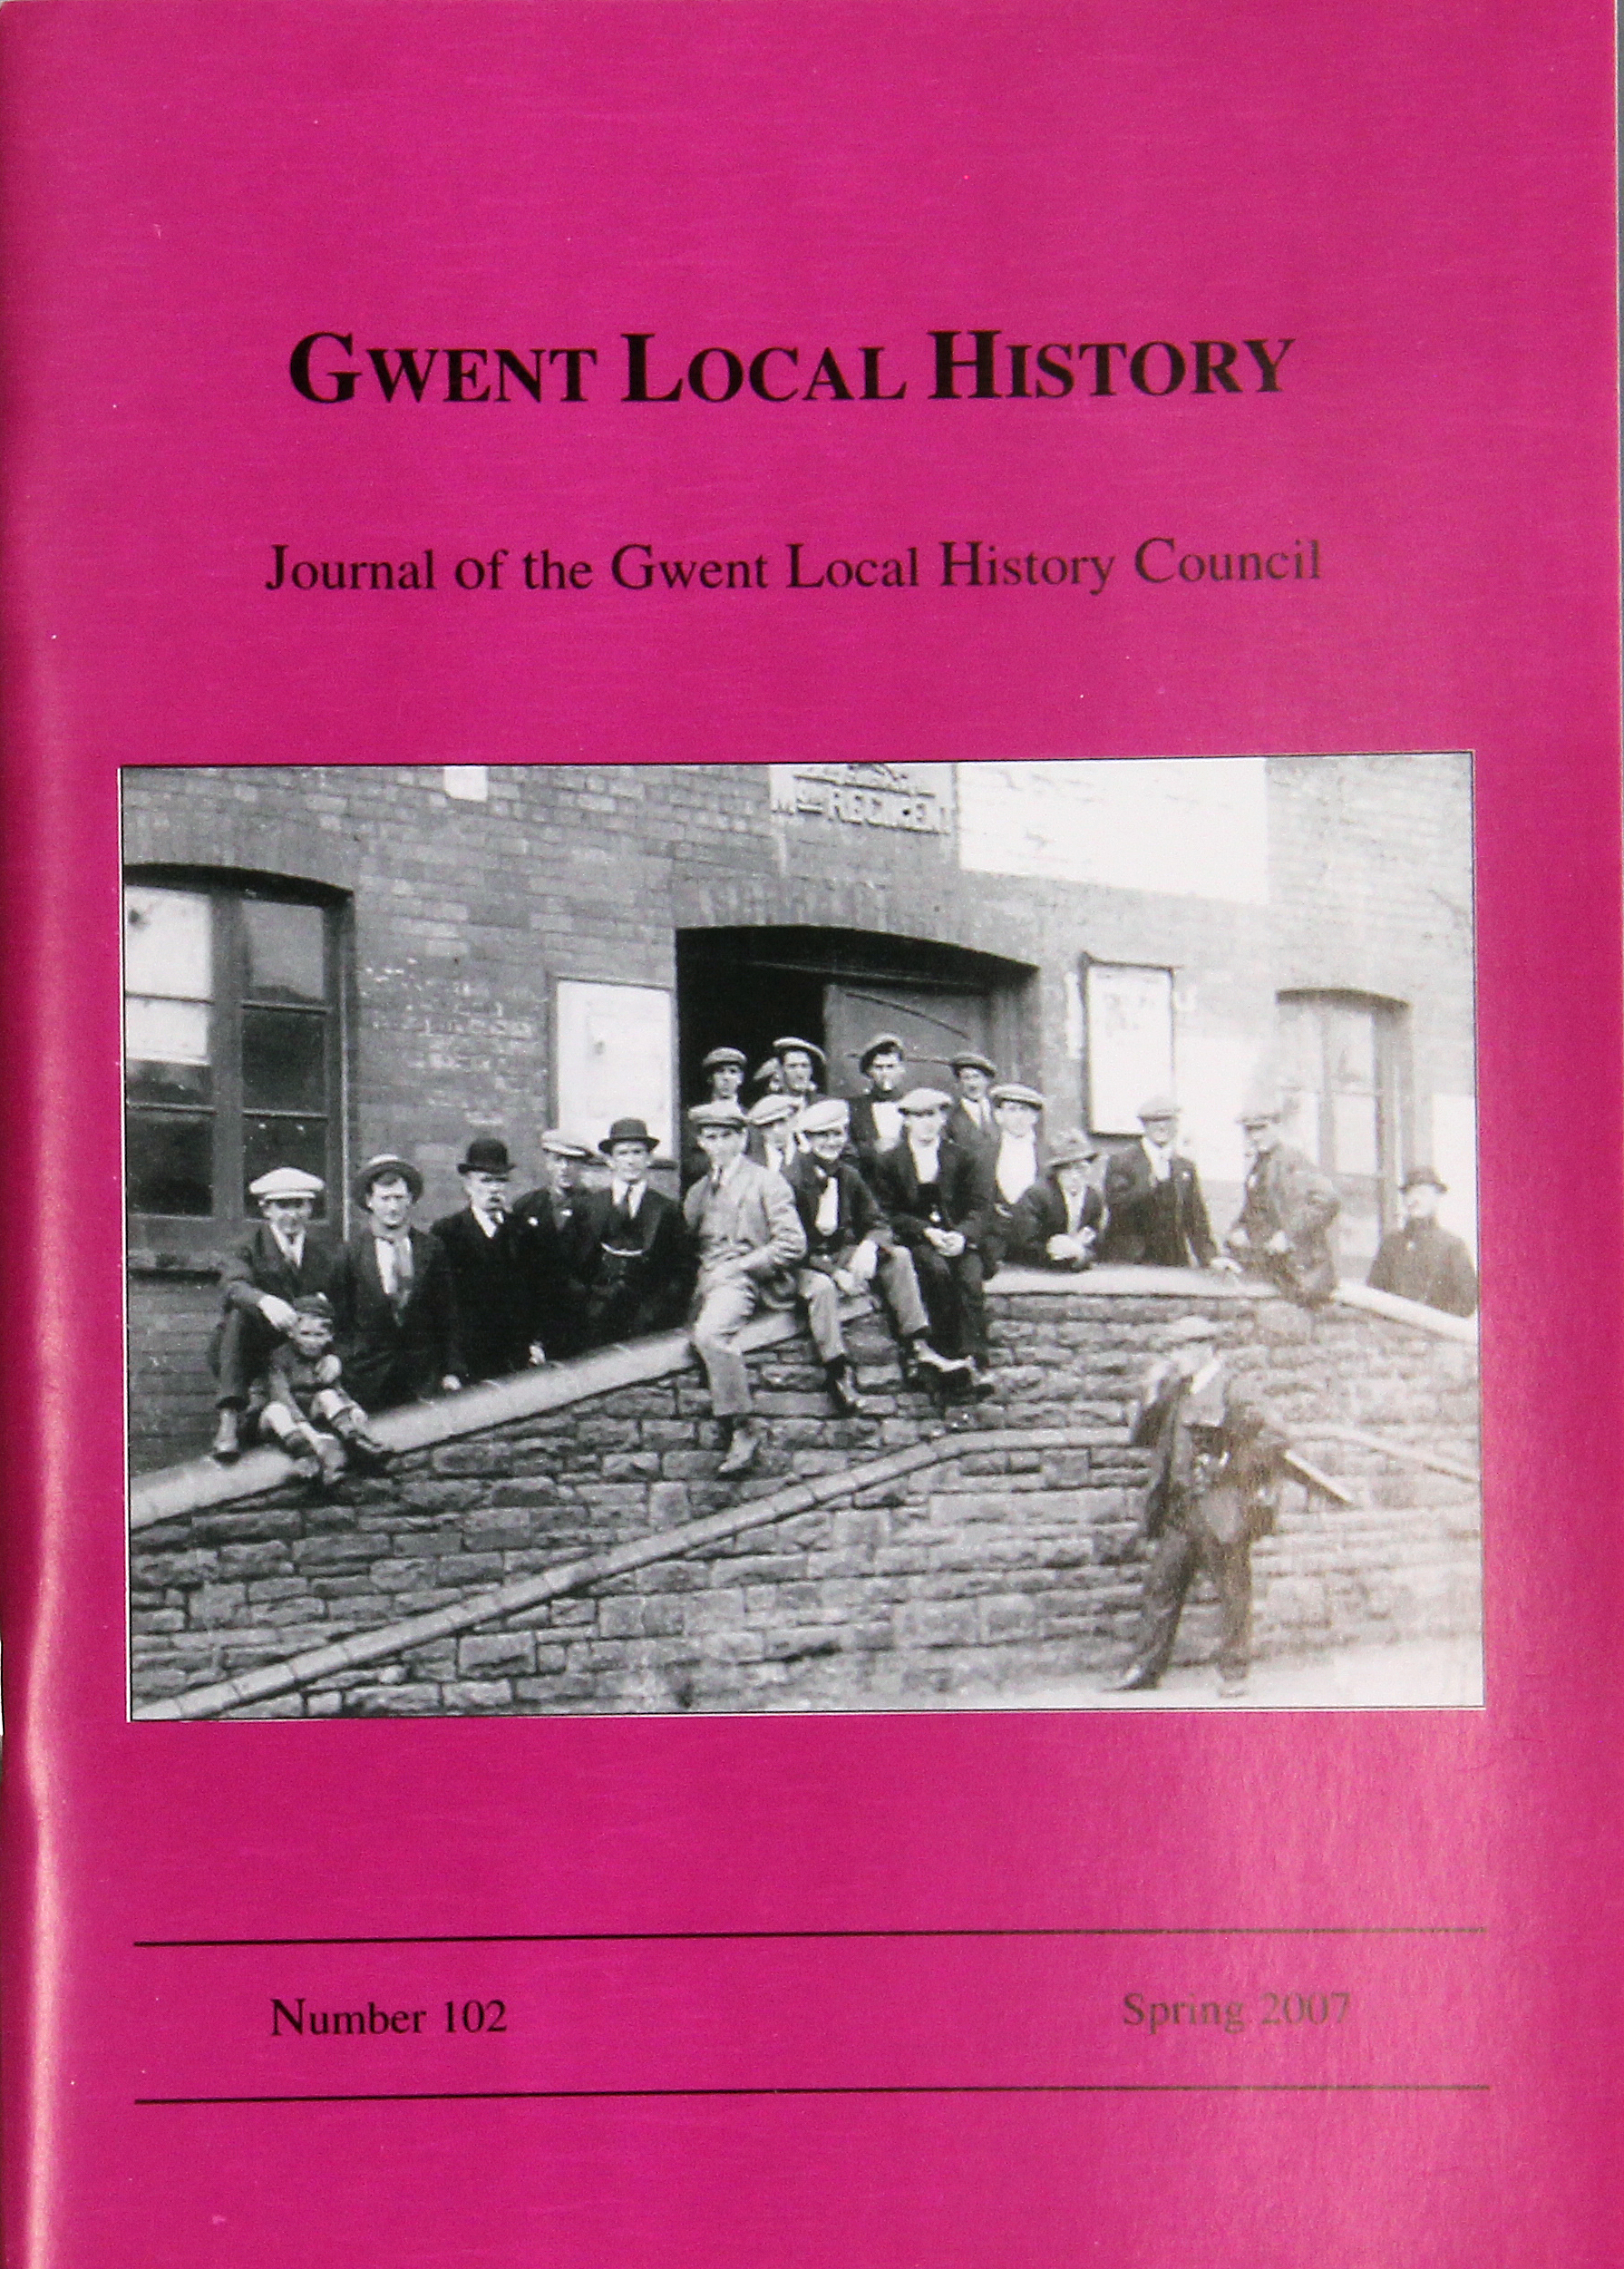 Gwent Local History: Journal of the Gwent Local History Council No.102, Spring 2007, £2.00